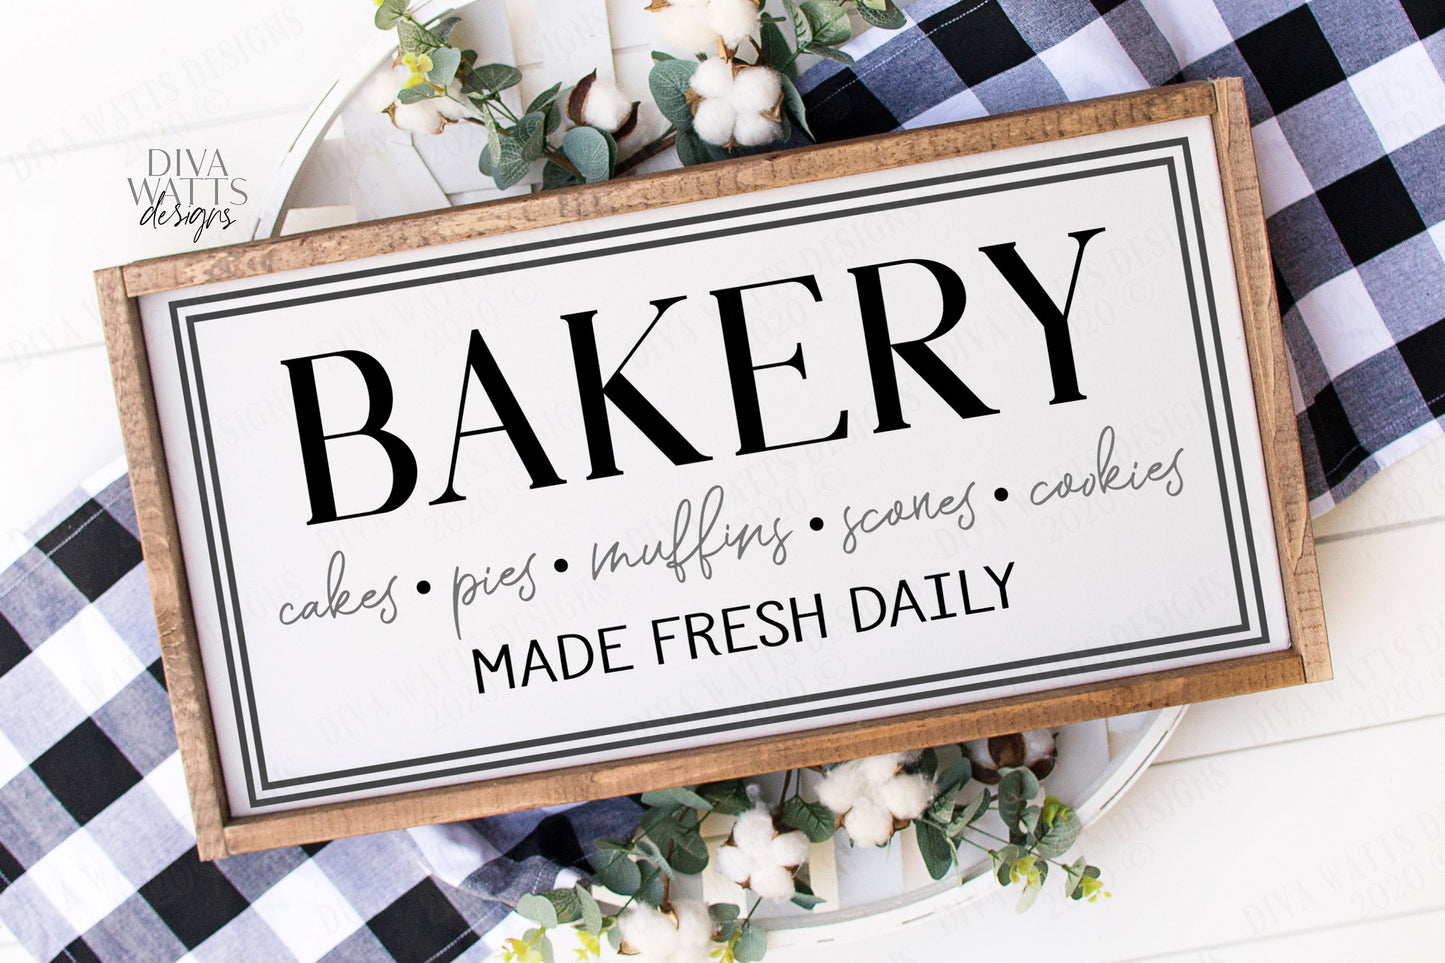 SVG | Bakery | Cutting File | Modern Farmhouse Style | Cakes Pies Muffins Scones Cookies | Kitchen Sign | Vinyl Stencil HTV |